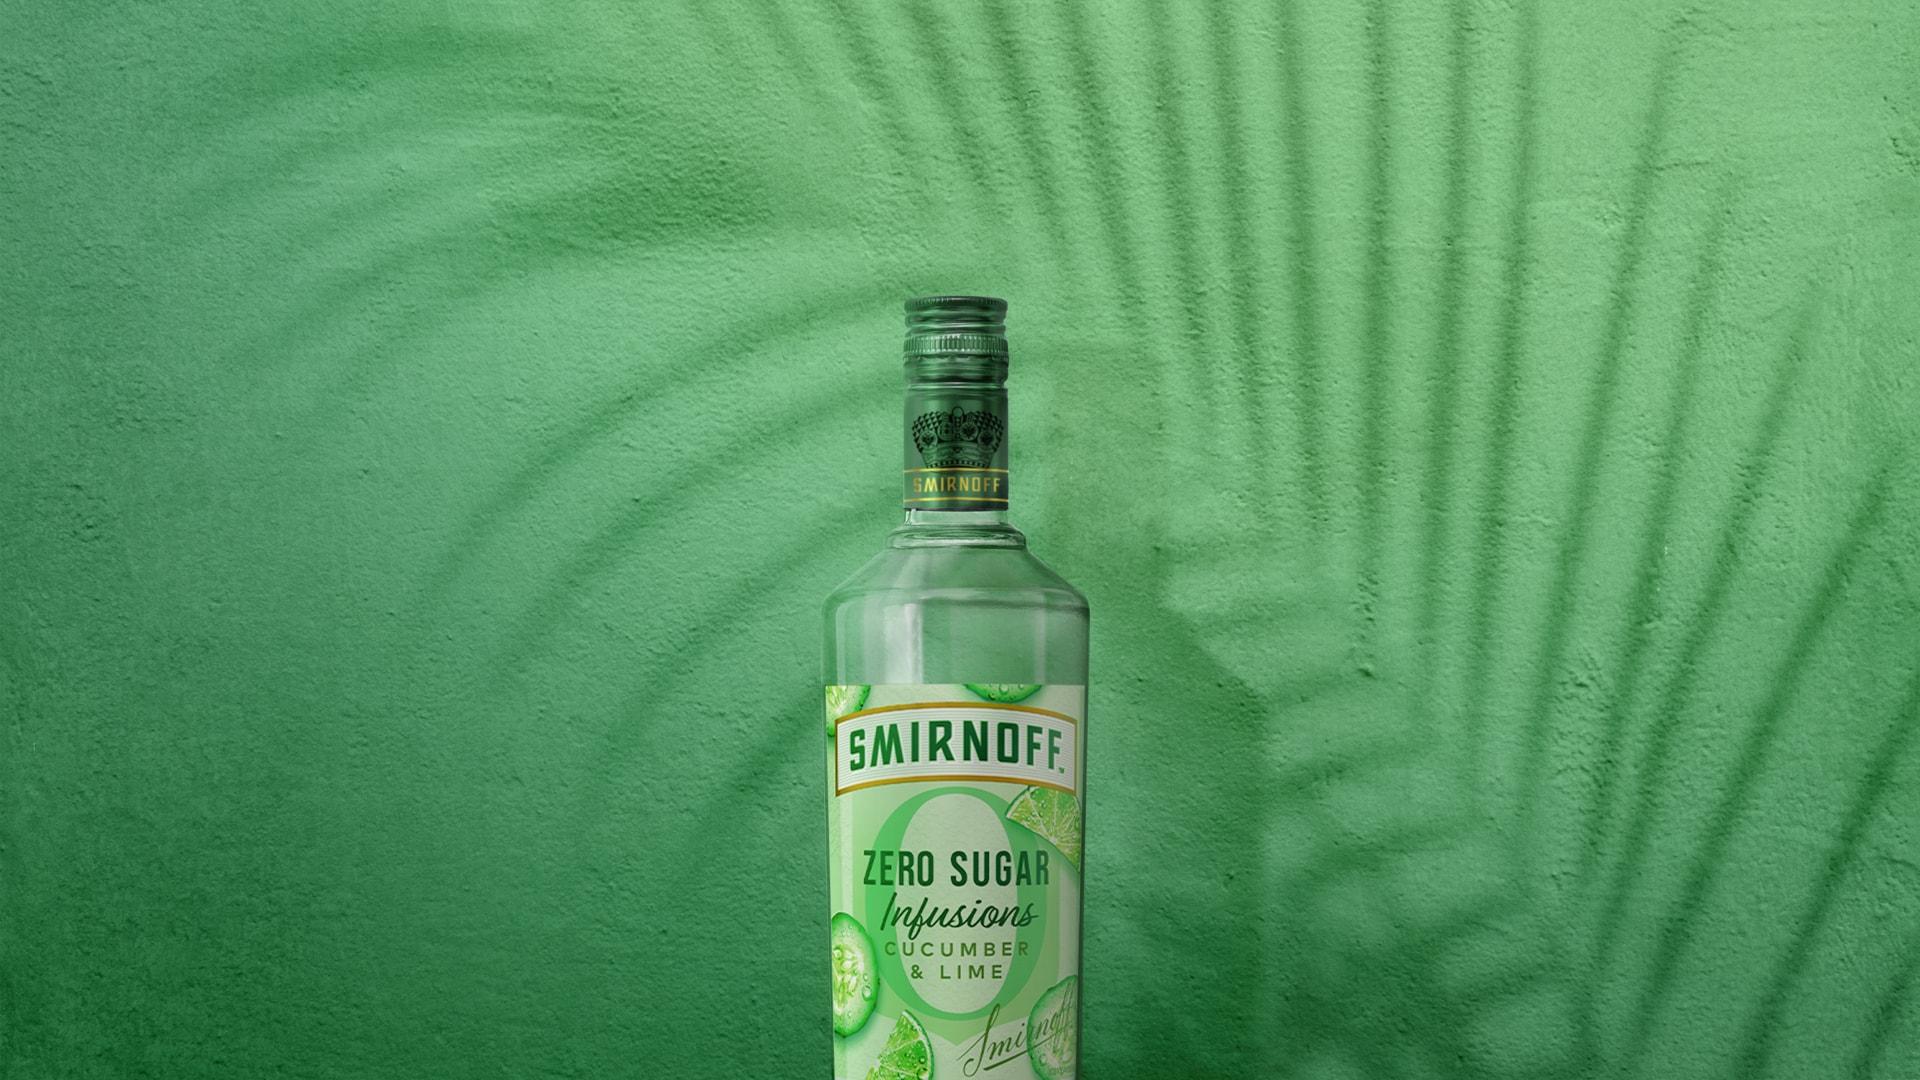 Smirnoff Zero Sugar Infusions Cucumber & Lime on green tropical background